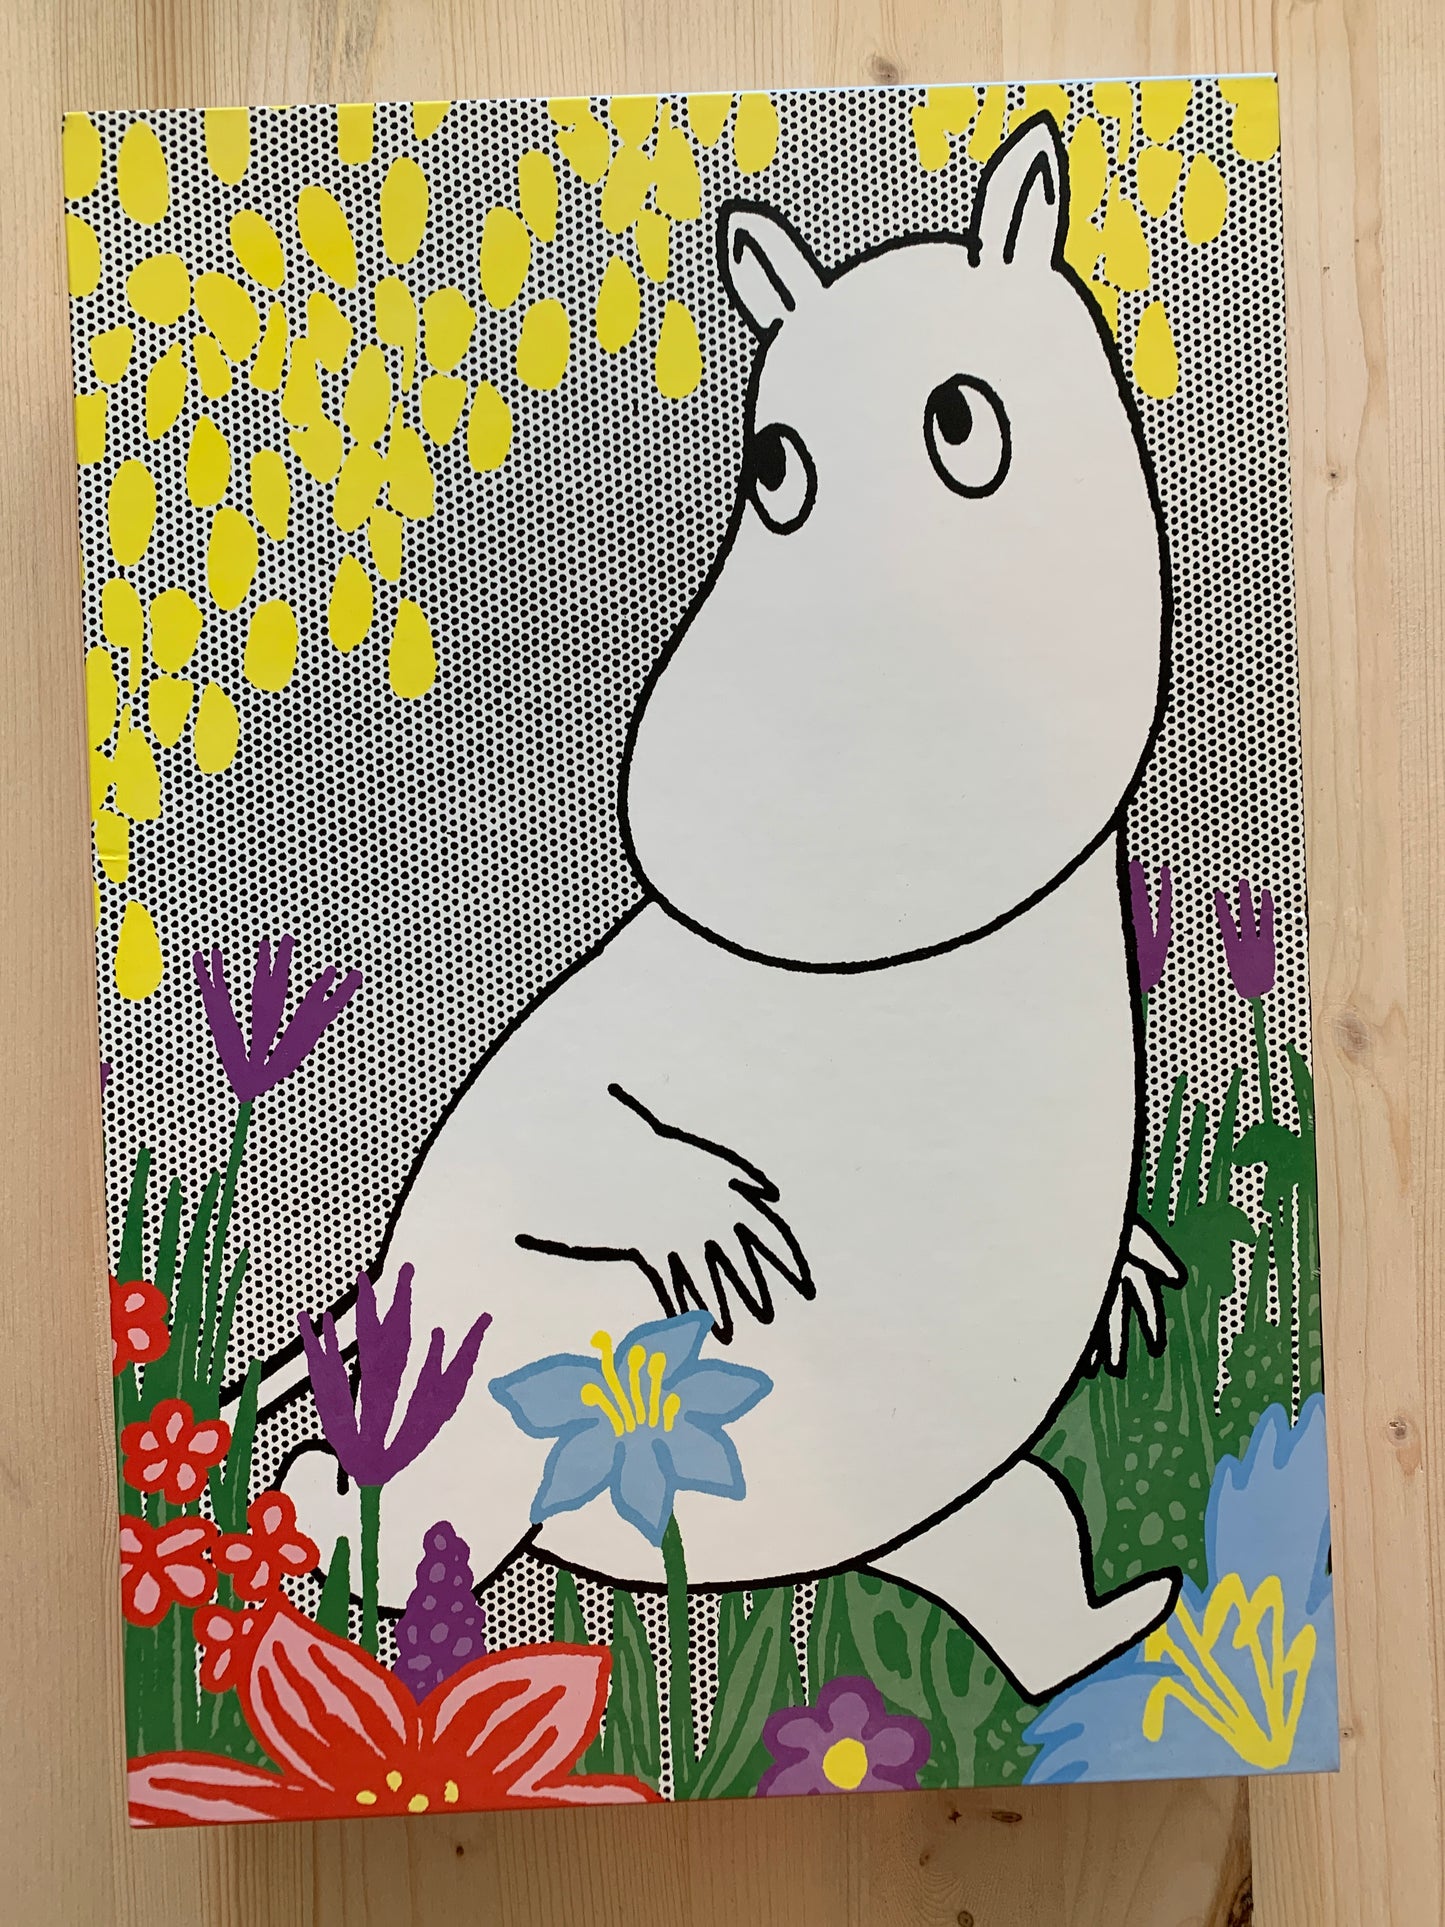 Moomin: The Complete Tove Jansson Edition